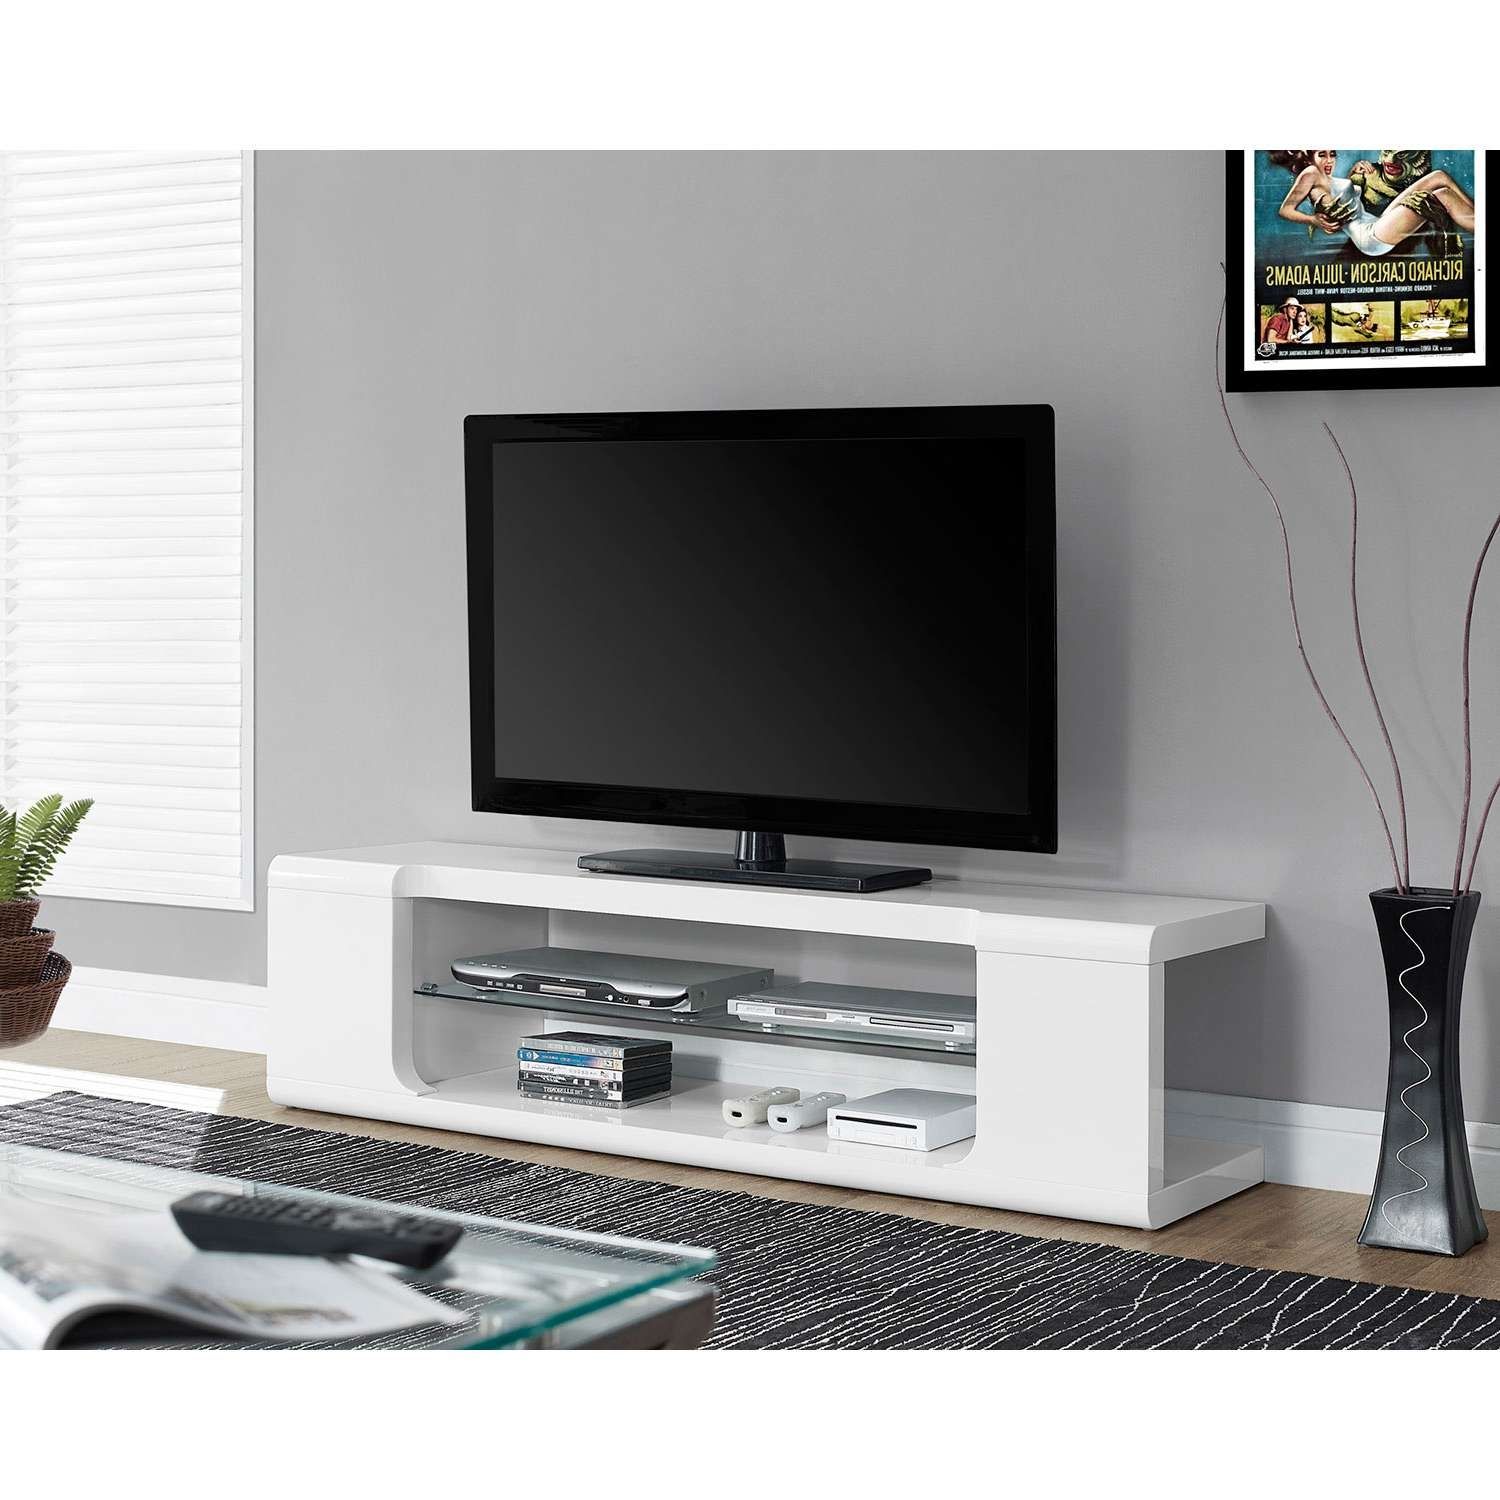 Monarch Tv Stand For Tvs Up To 60" (i 3535) – Glossy White : Tv Intended For Modern Glass Tv Stands (View 15 of 15)